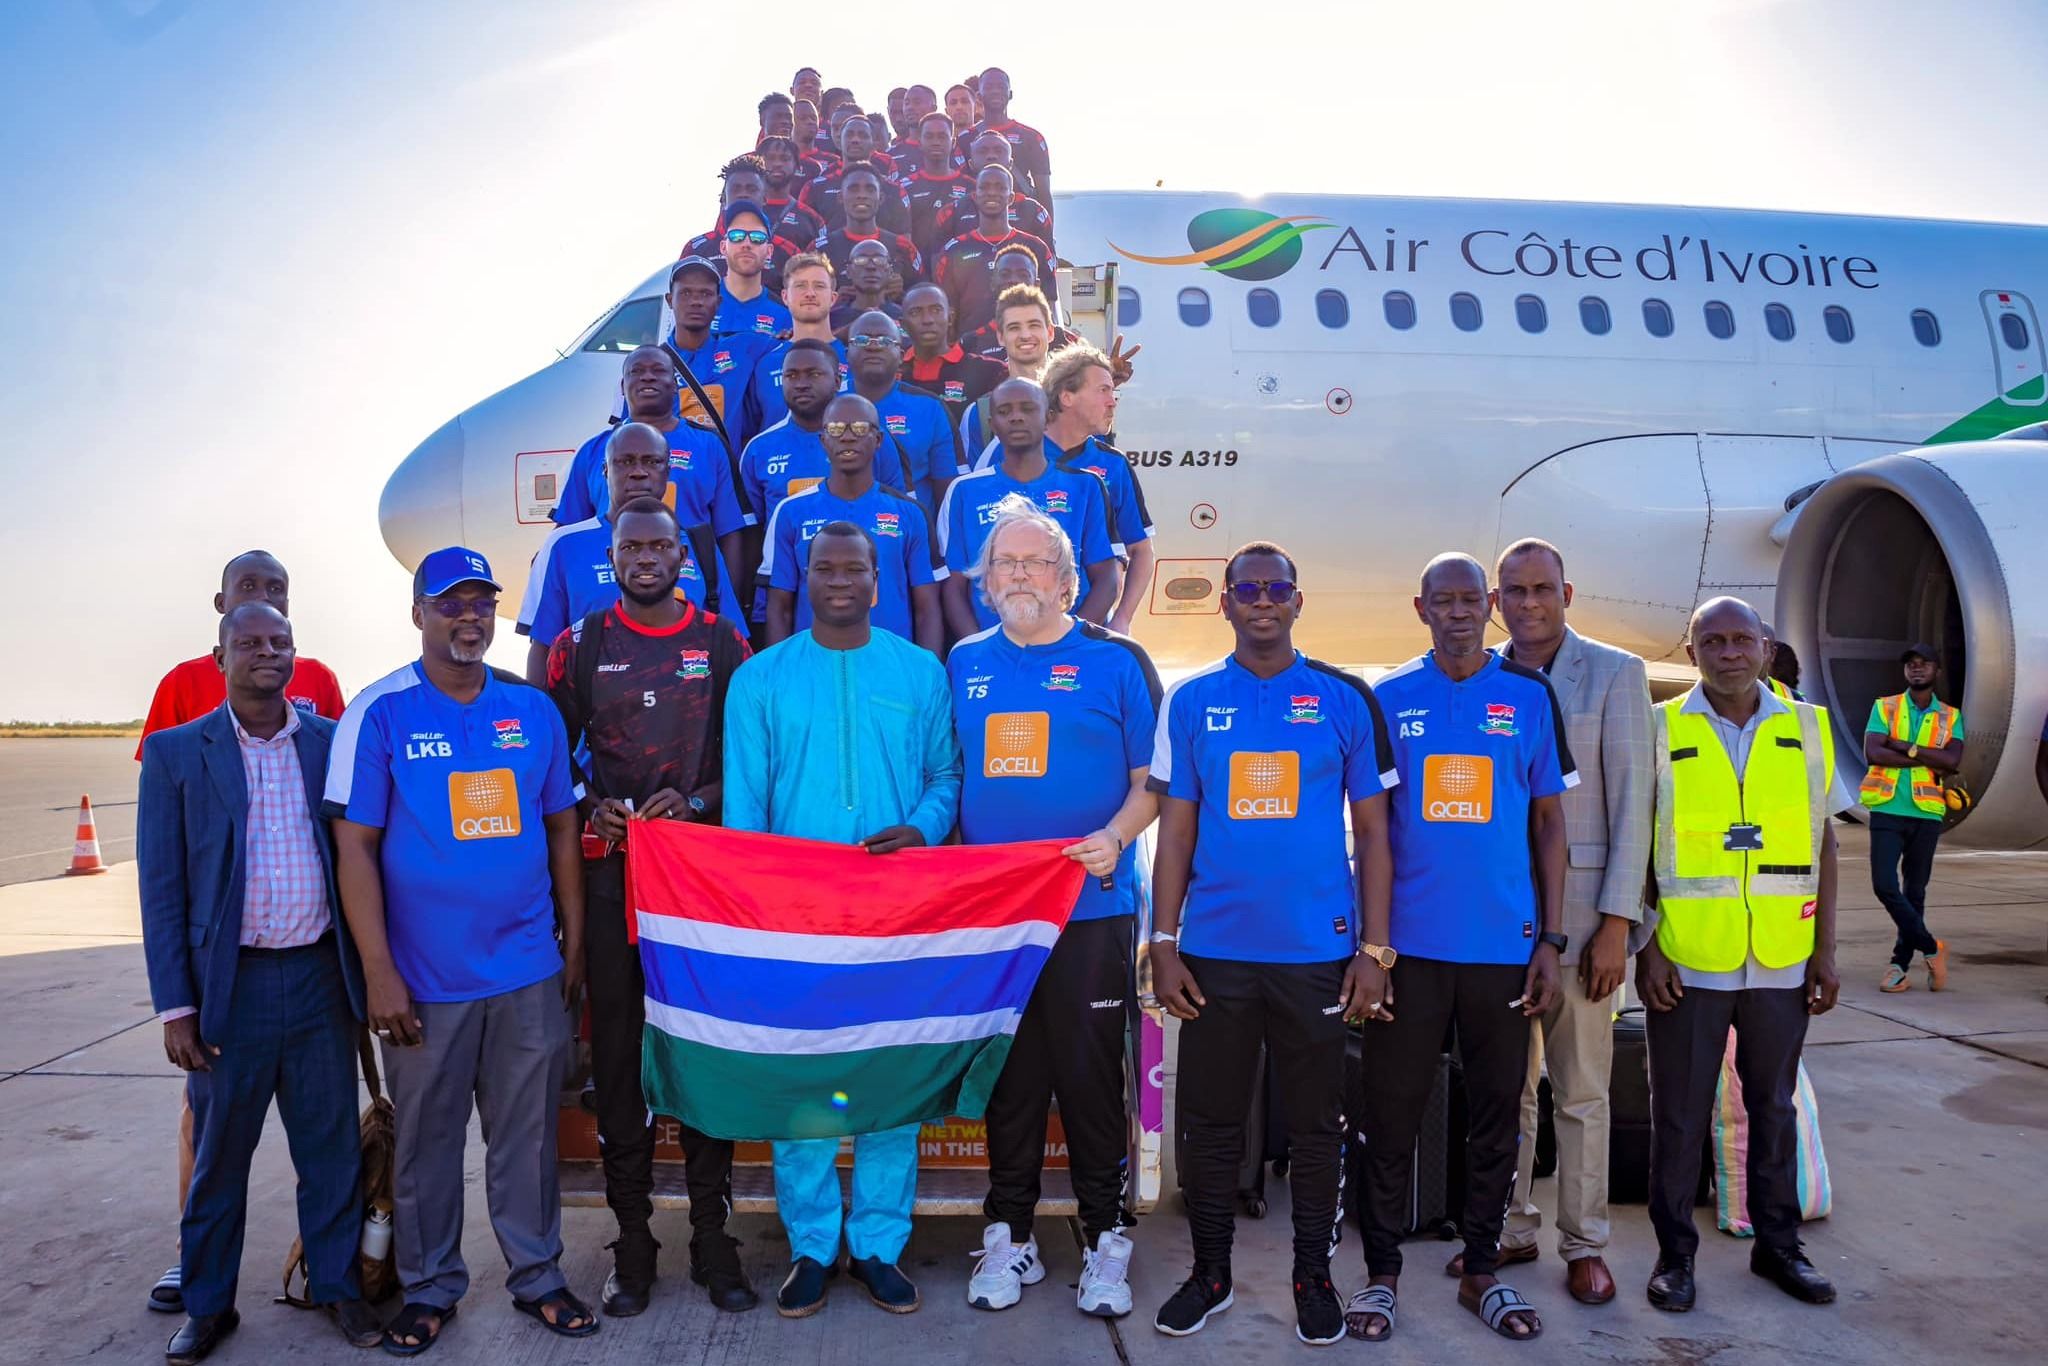 Gambia National Football Team and Air Cote d'Ivoire A319